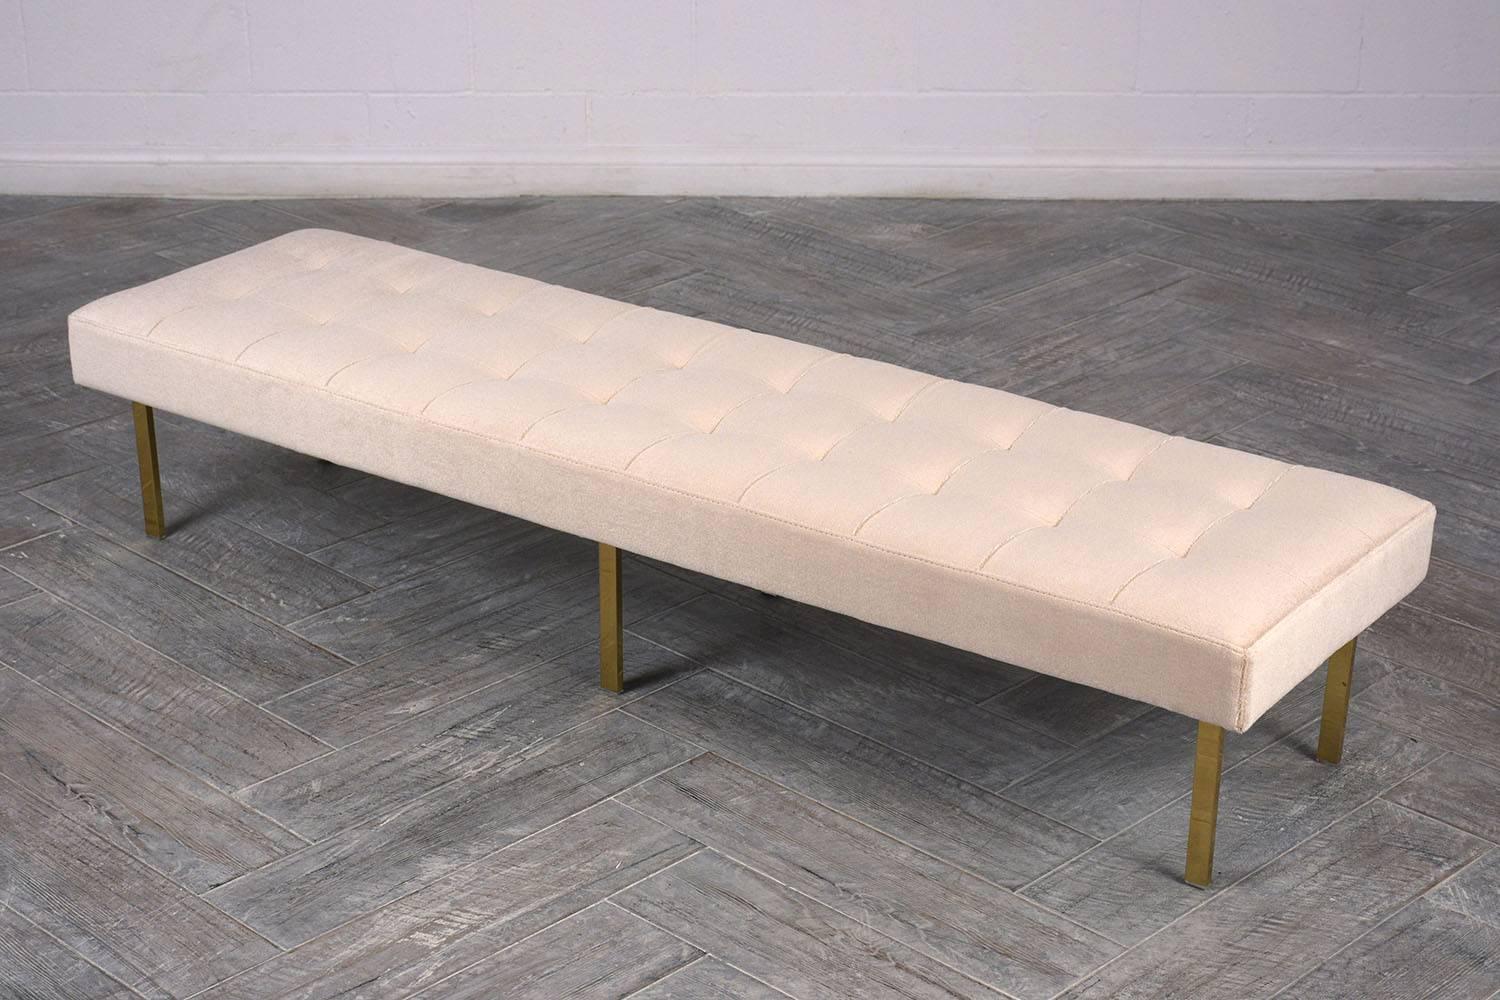 This Mid-Century Modern style Milo Baughman bench has been professionally upholstered in a beige Mohair fabric with a square, top-stitch tufted design. The bench features six solid brass legs finished in a stunning gold color. This bench is sturdy,